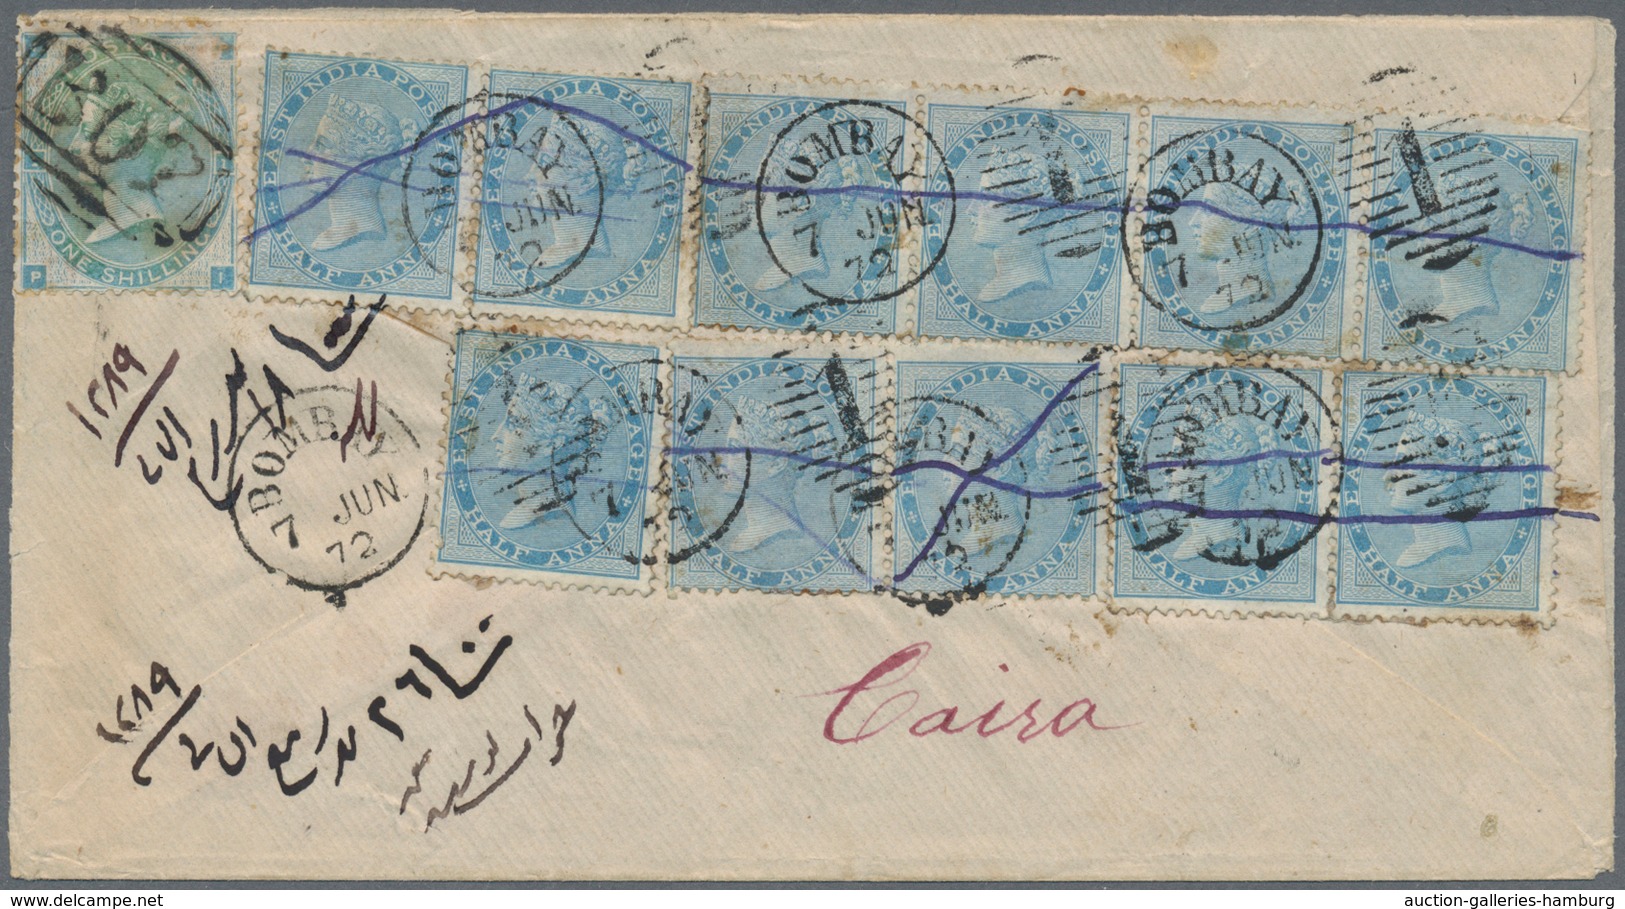 Indien: 1872 Cover From Bombay To Cairo, Egypt Via Suez, Franked On The Reverse By Eleven ½a. Pale B - 1854 East India Company Administration